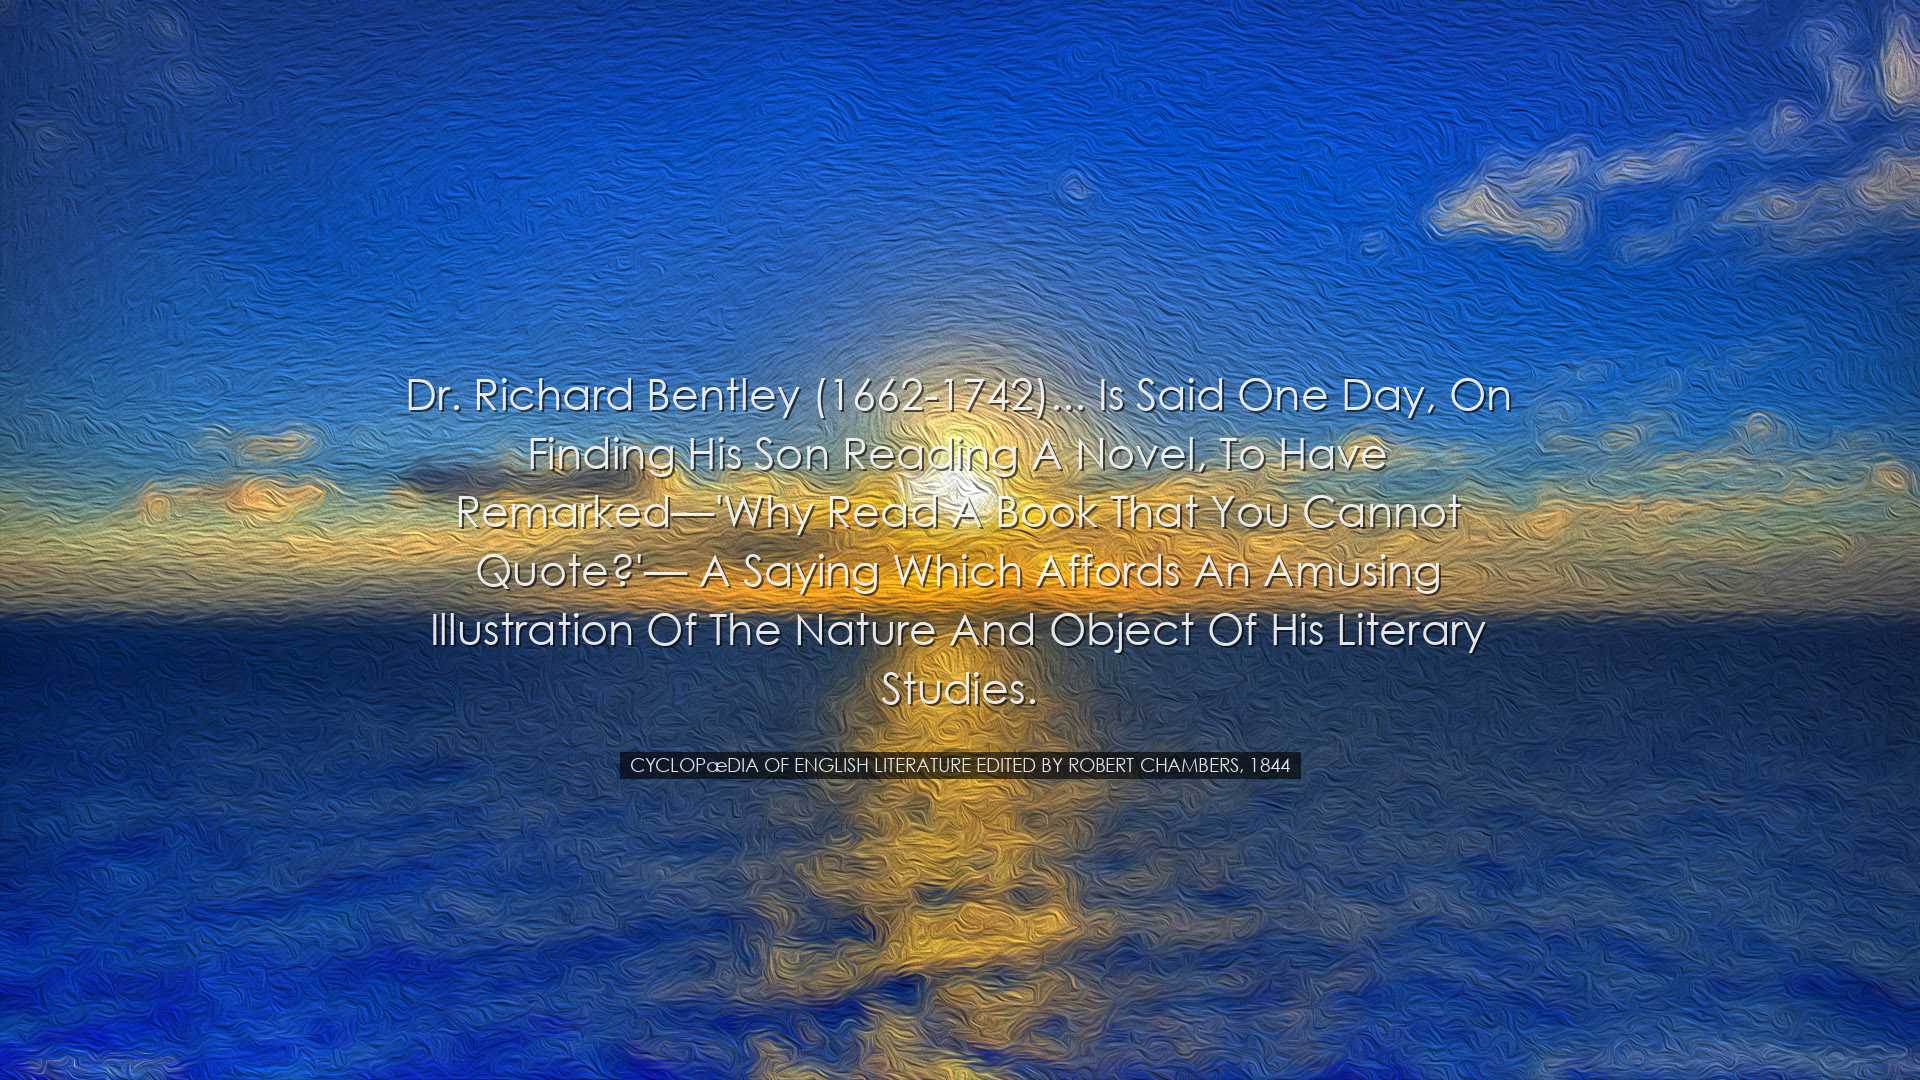 Dr. Richard Bentley (1662-1742)... is said one day, on finding his